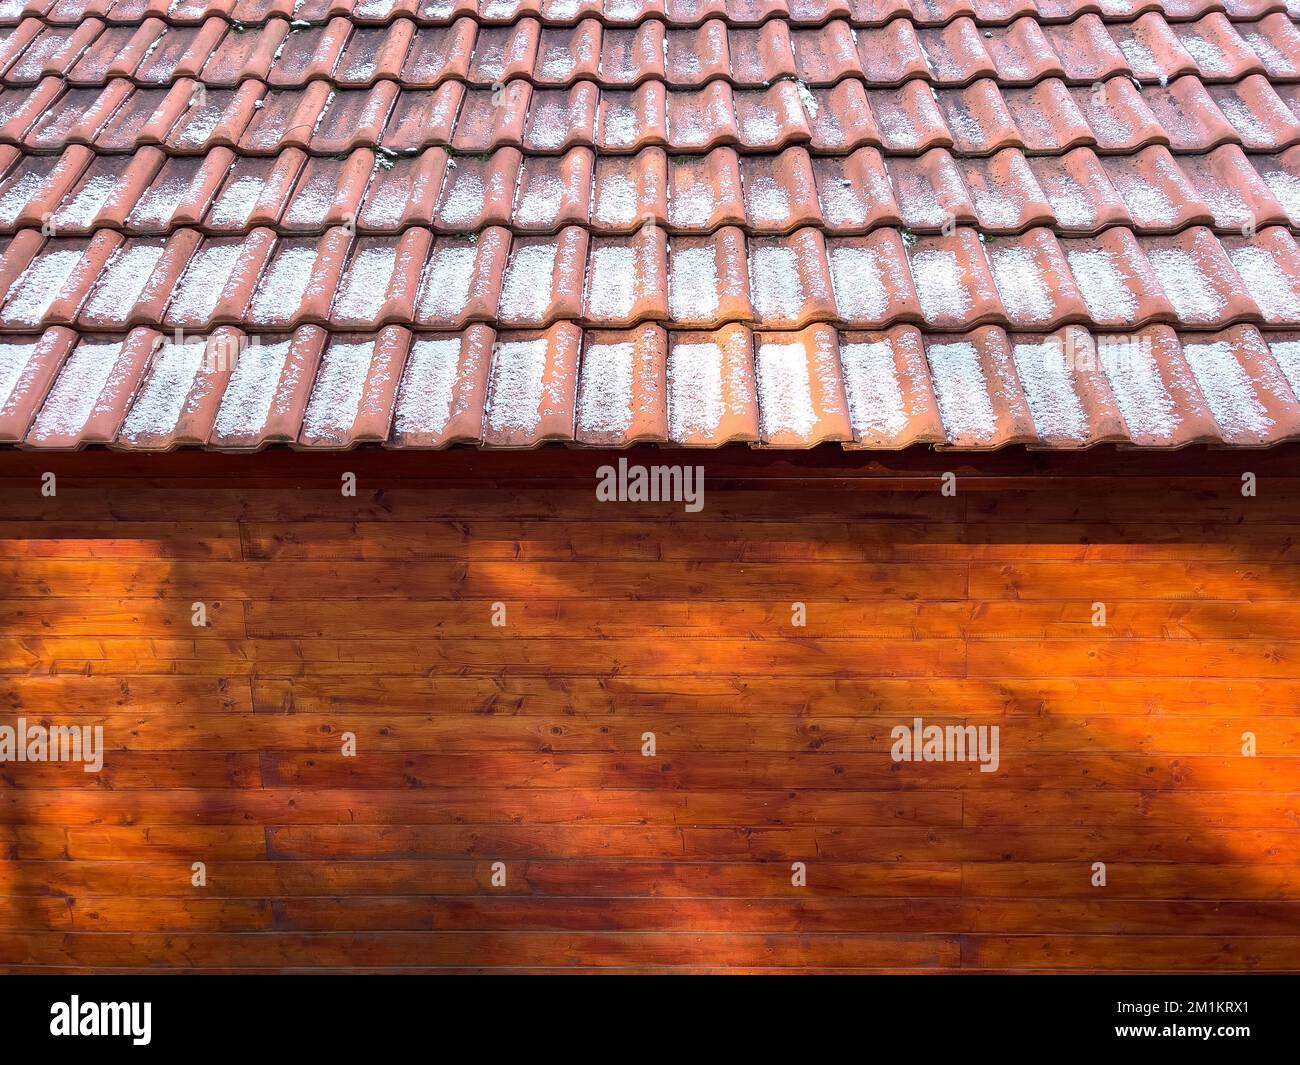 A wooden cabin with snow on the roof shingles Stock Photo